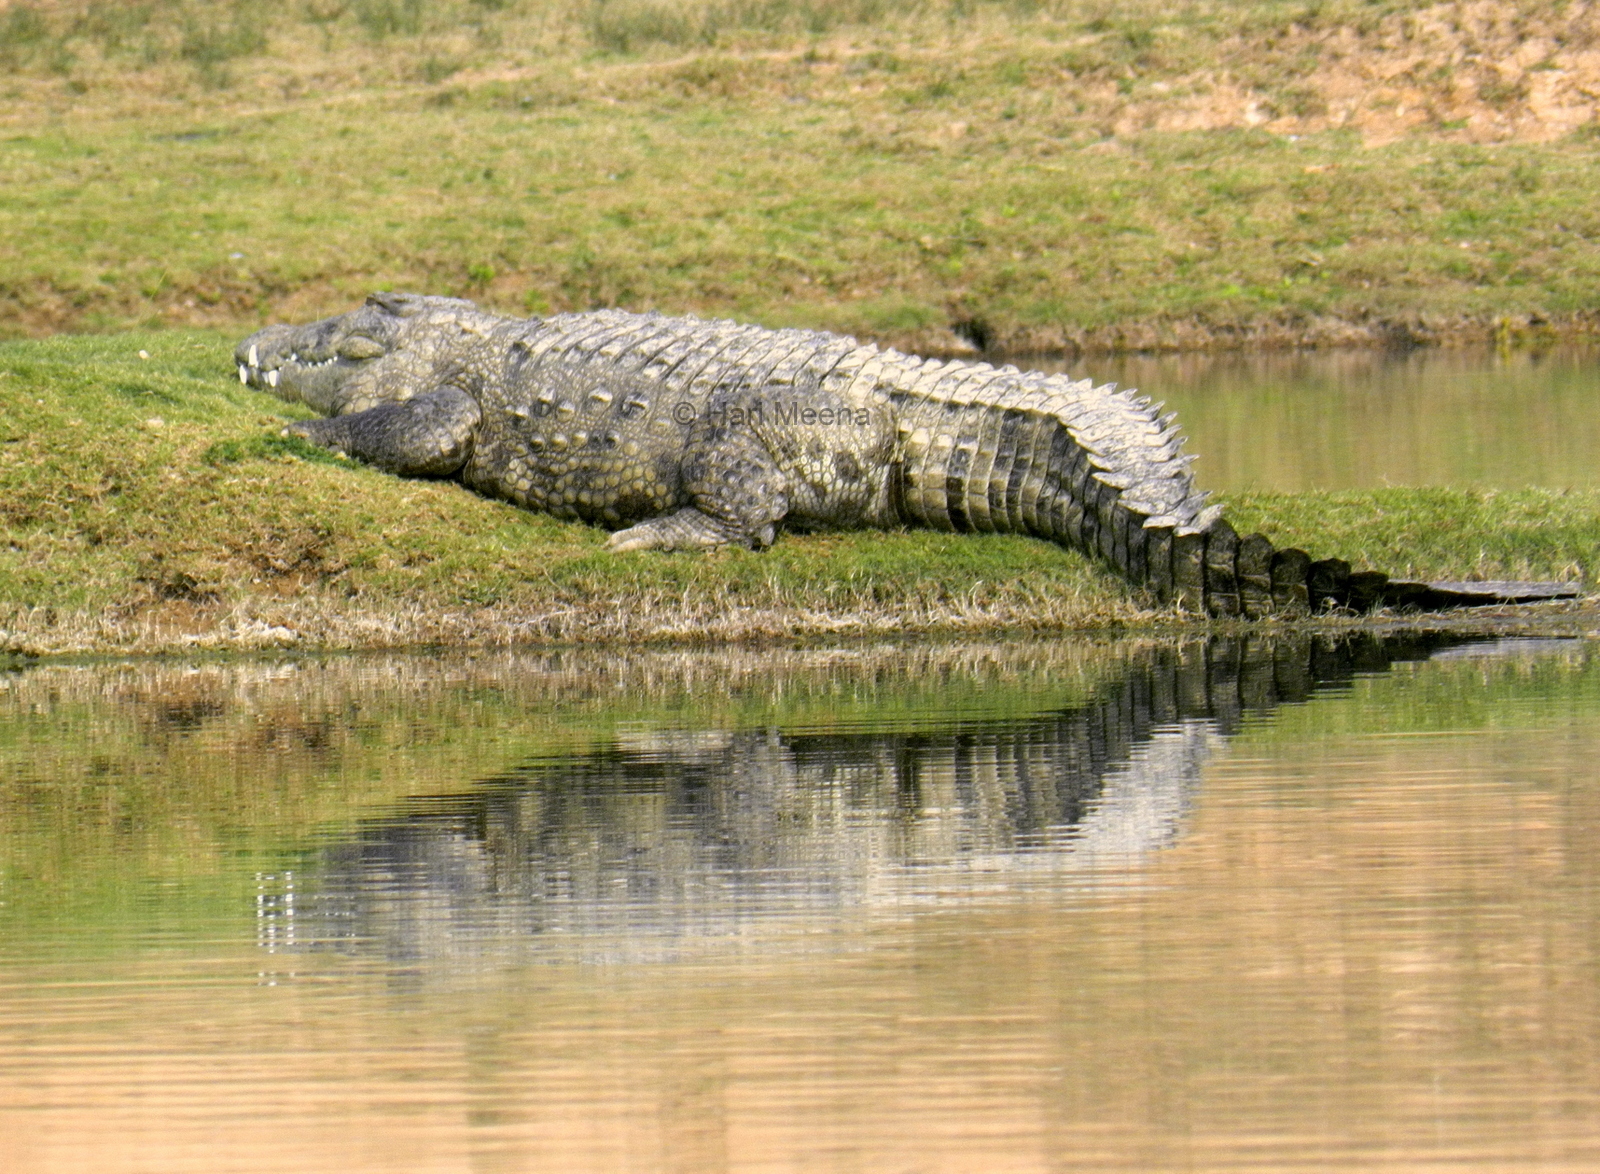 how did the mugger crocodile get its name and what does it mean in hindustani